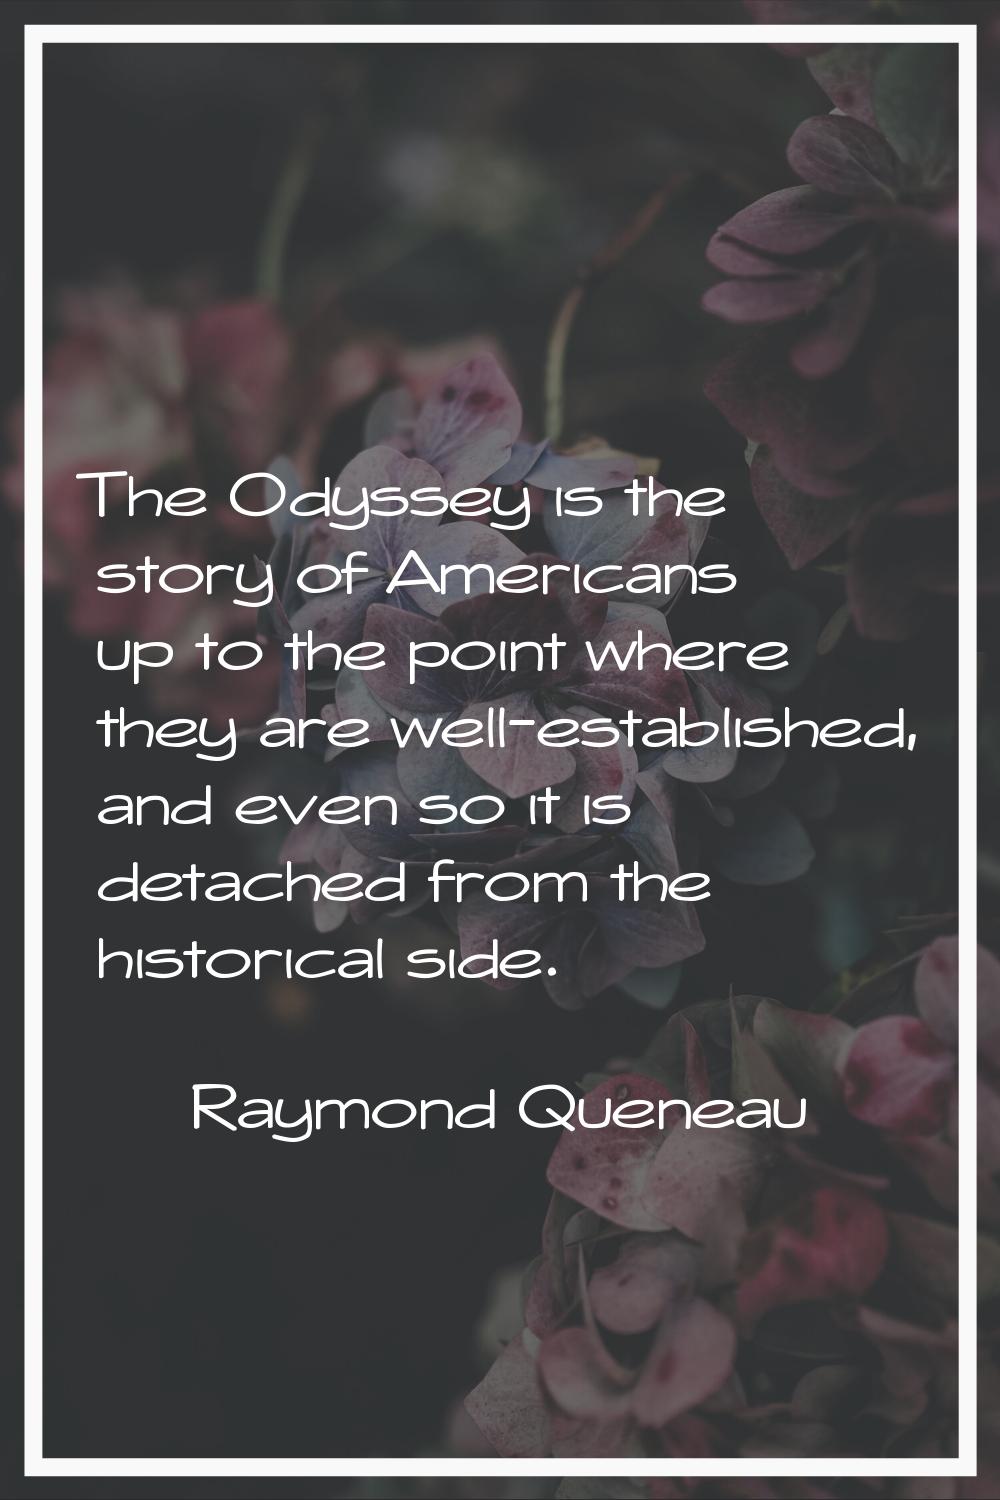 The Odyssey is the story of Americans up to the point where they are well-established, and even so 